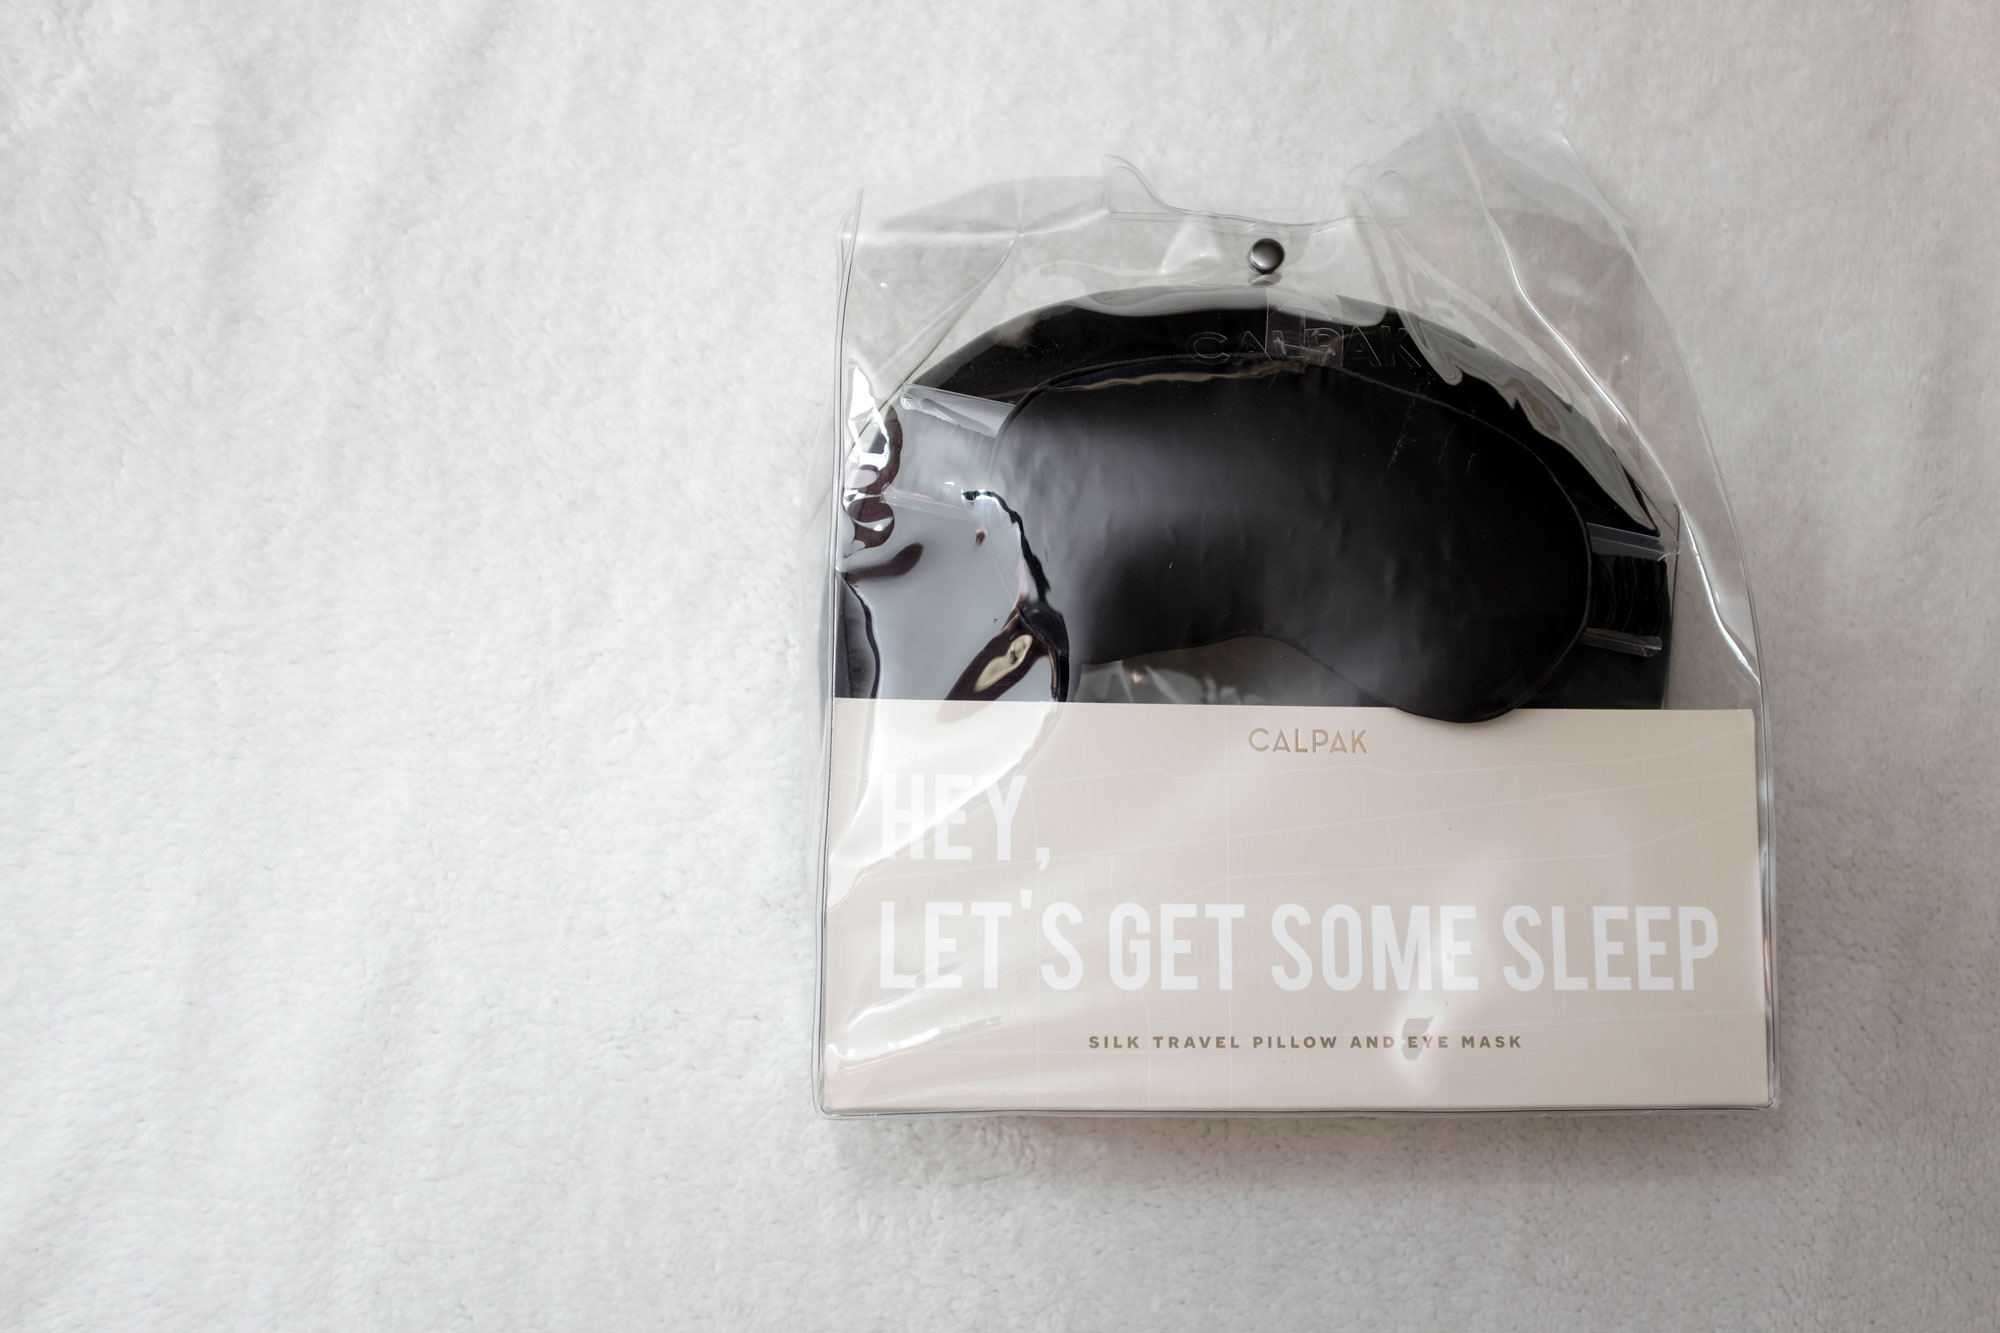 Photo of the silk travel set as it arrived; the pillow and mask are visible through the clear square plastic case